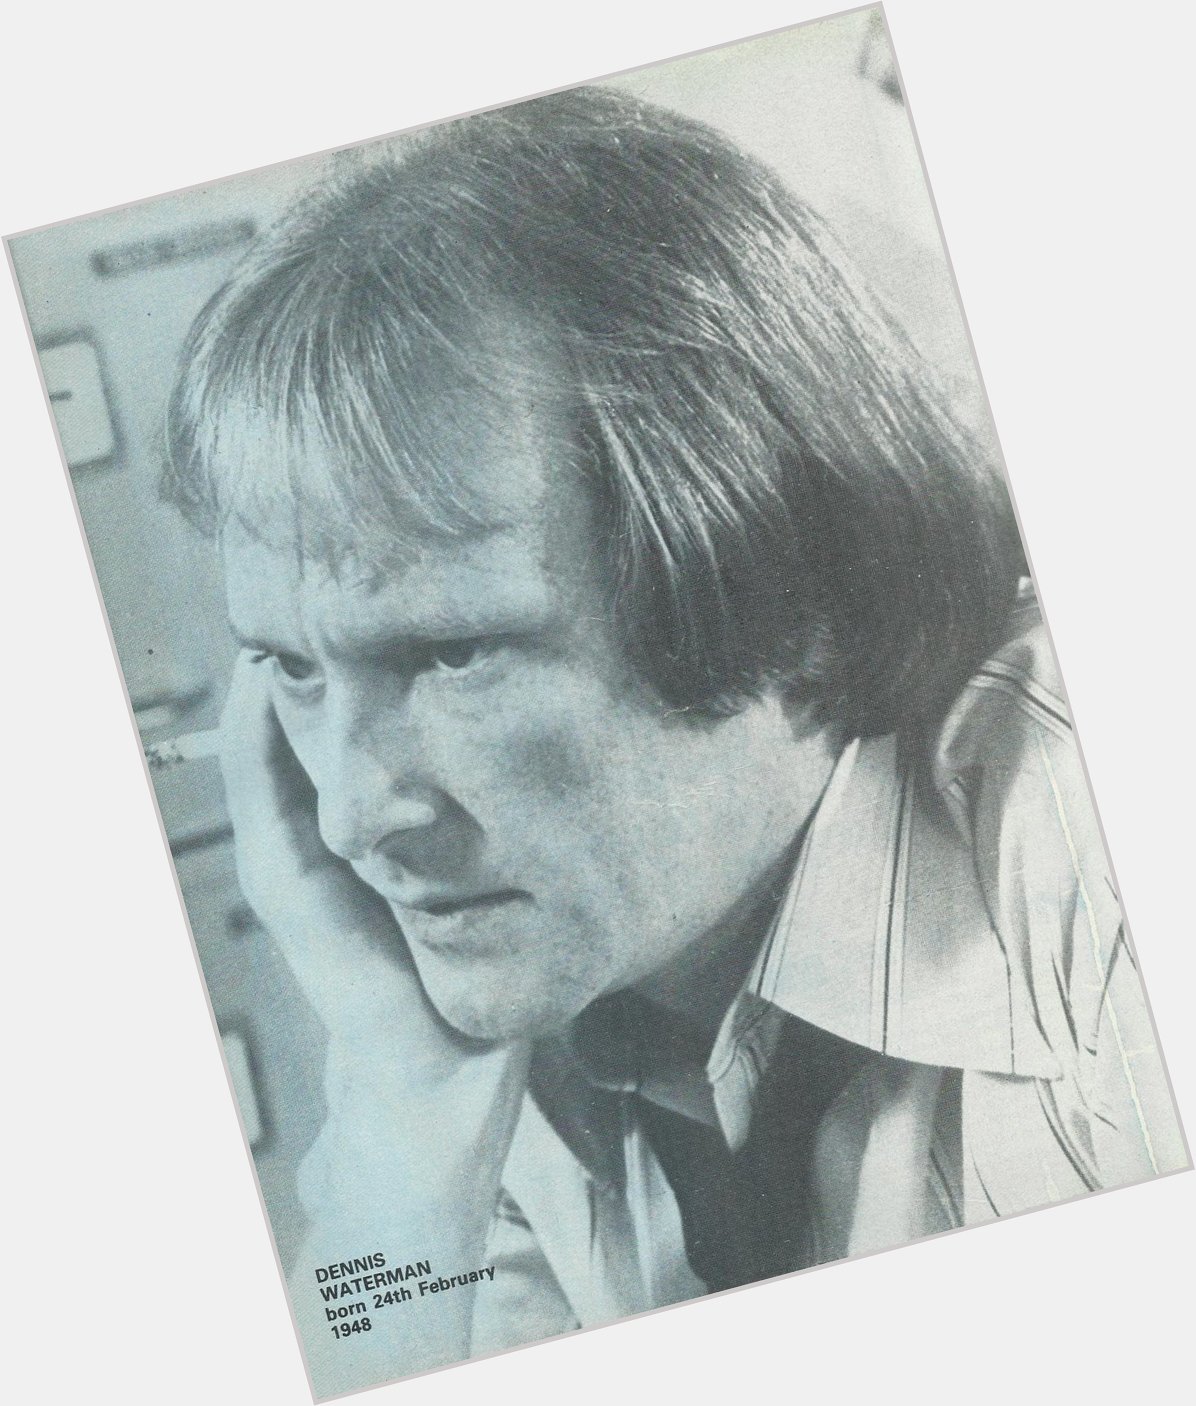 Wishing Mr Dennis Waterman a Happy Birthday for today.
He\s seen here in the March 1979 issue of Photoplay. 